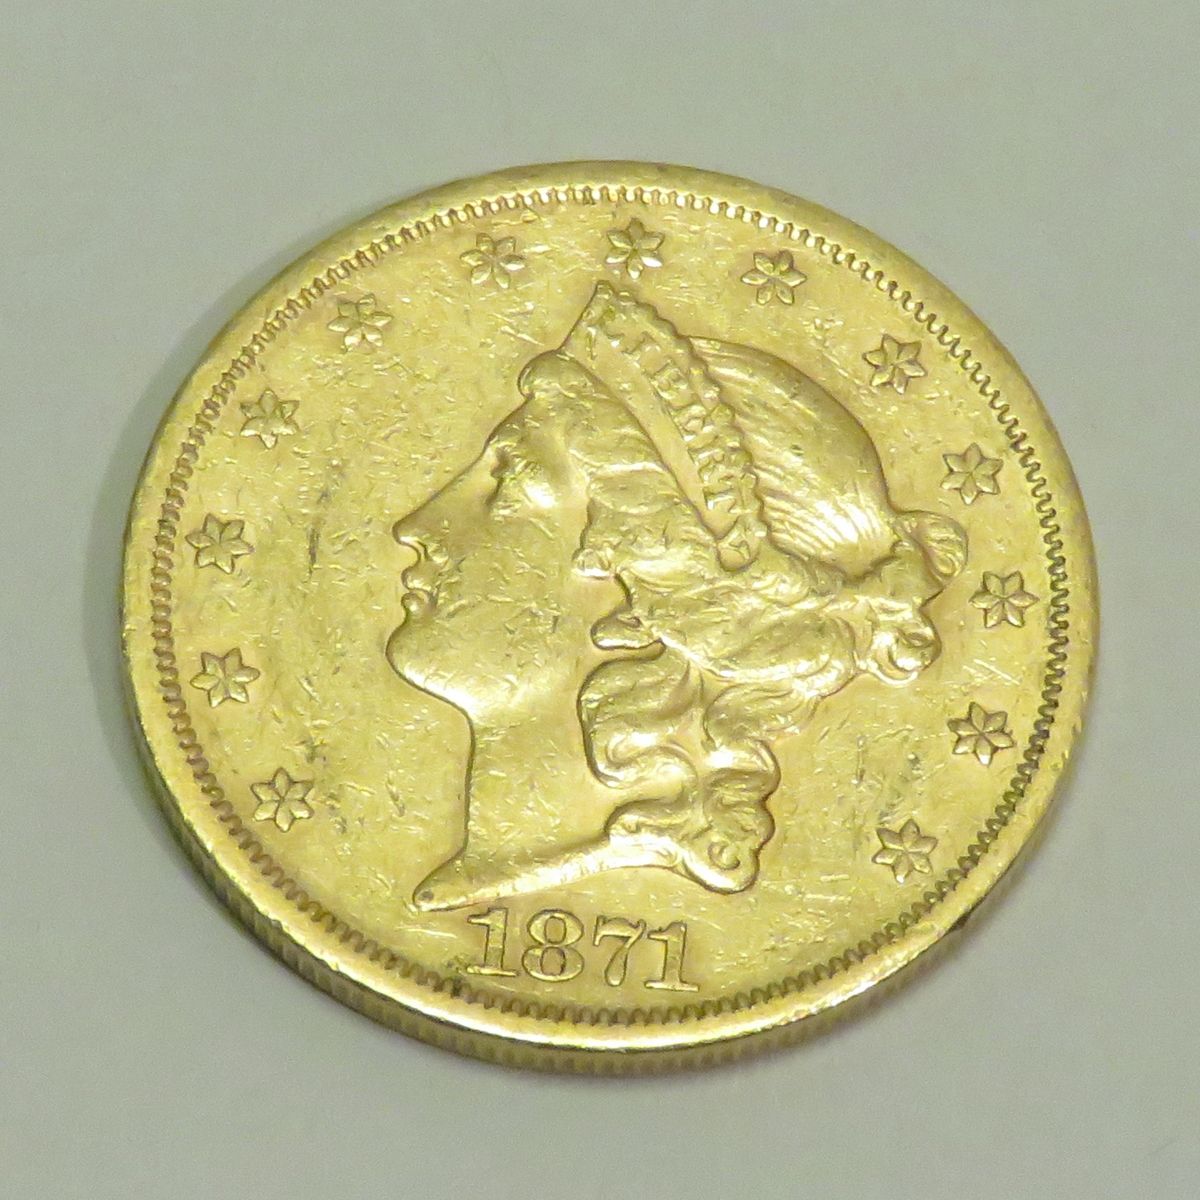 Null Gold coin of 20 Dollars-D "Liberty Head-Double Eagle" dated 1871, Engraver:&hellip;